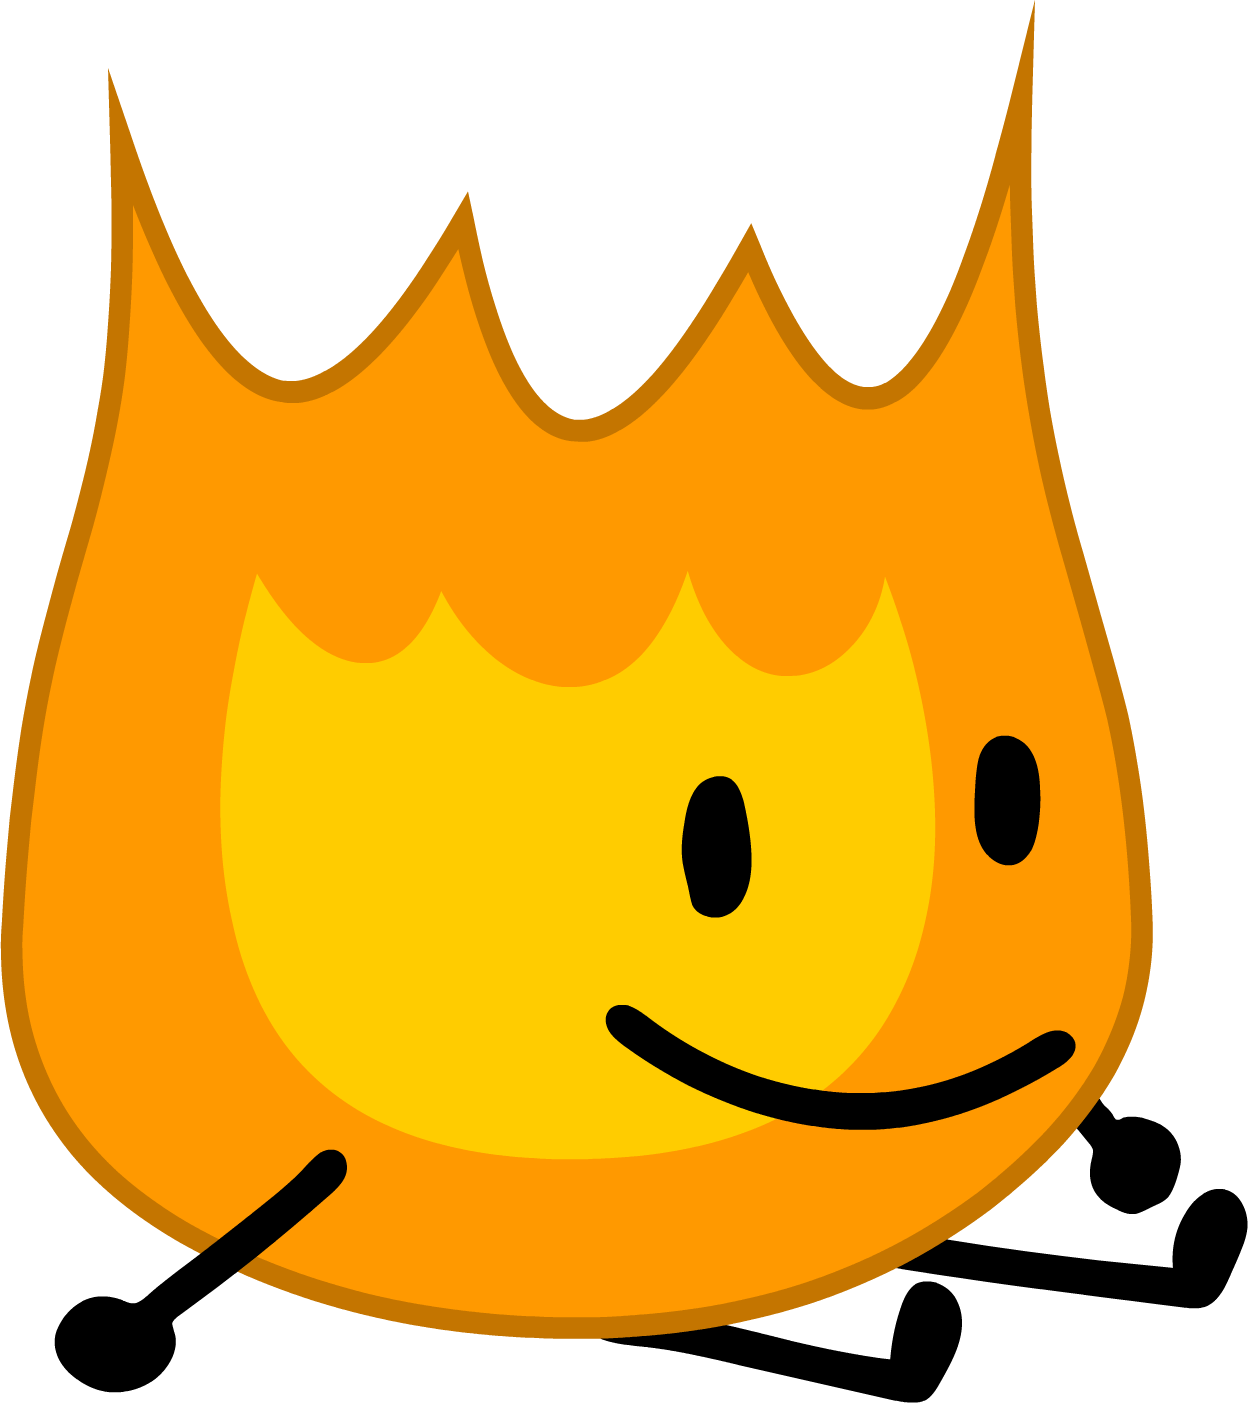 Animated Fire Character Smiling.png PNG image